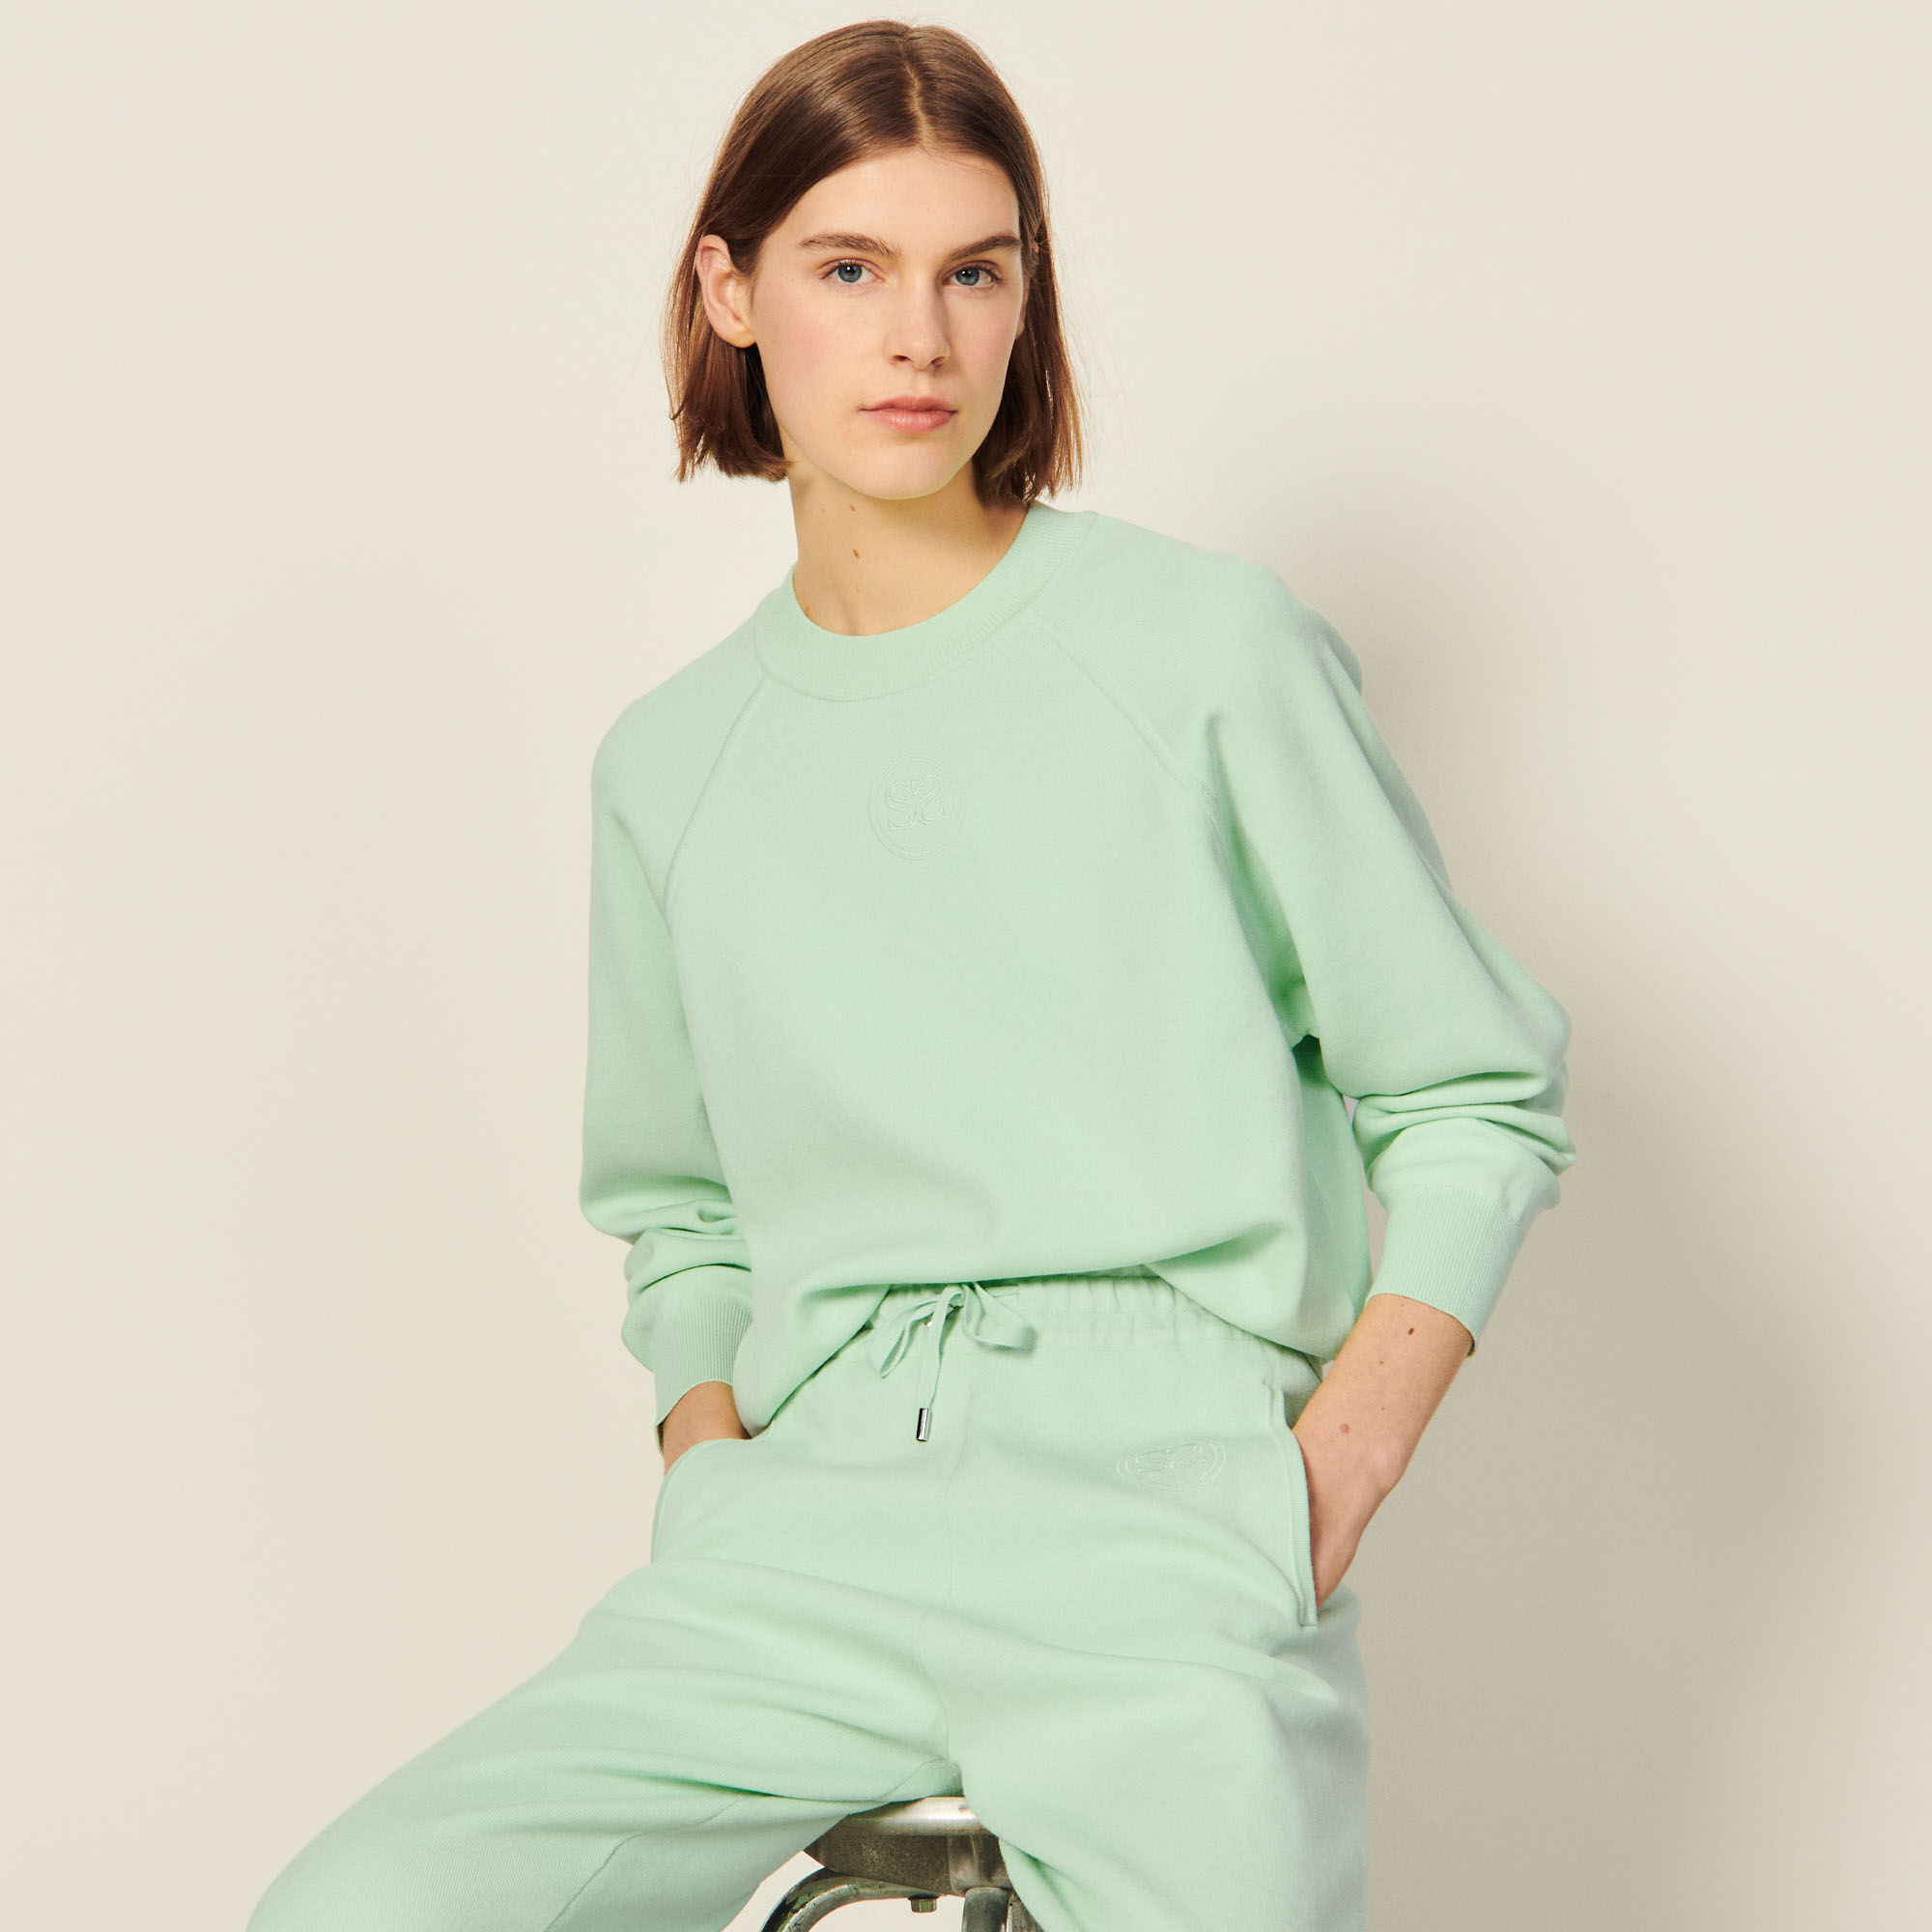 33 Embroidered Knit Sweatshirt : Tops color Mint 0 1 2 3 4 